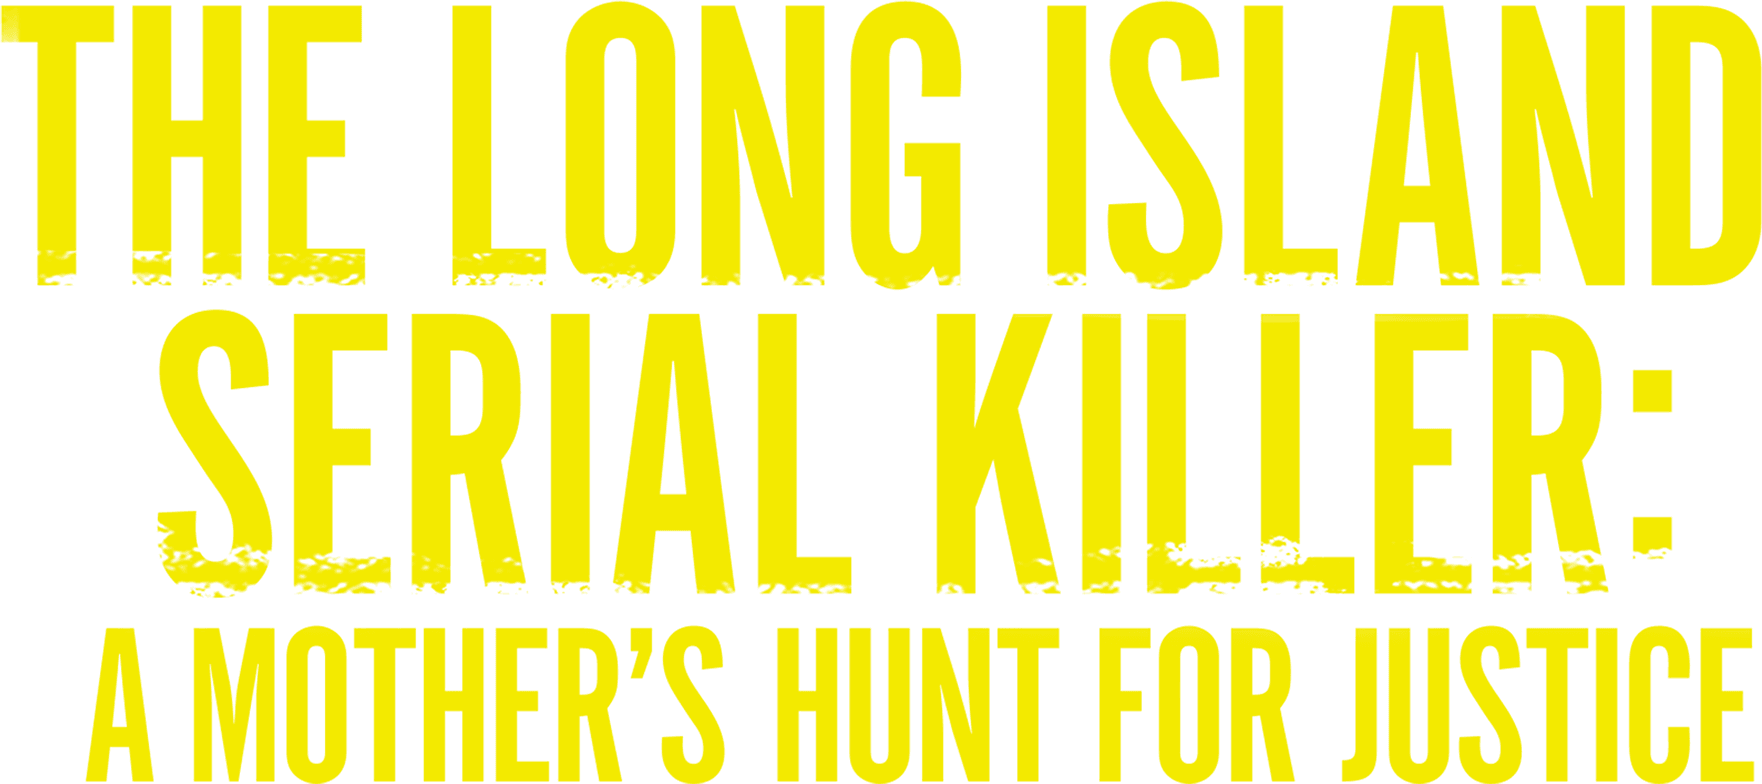 The Long Island Serial Killer: A Mother's Hunt for Justice logo